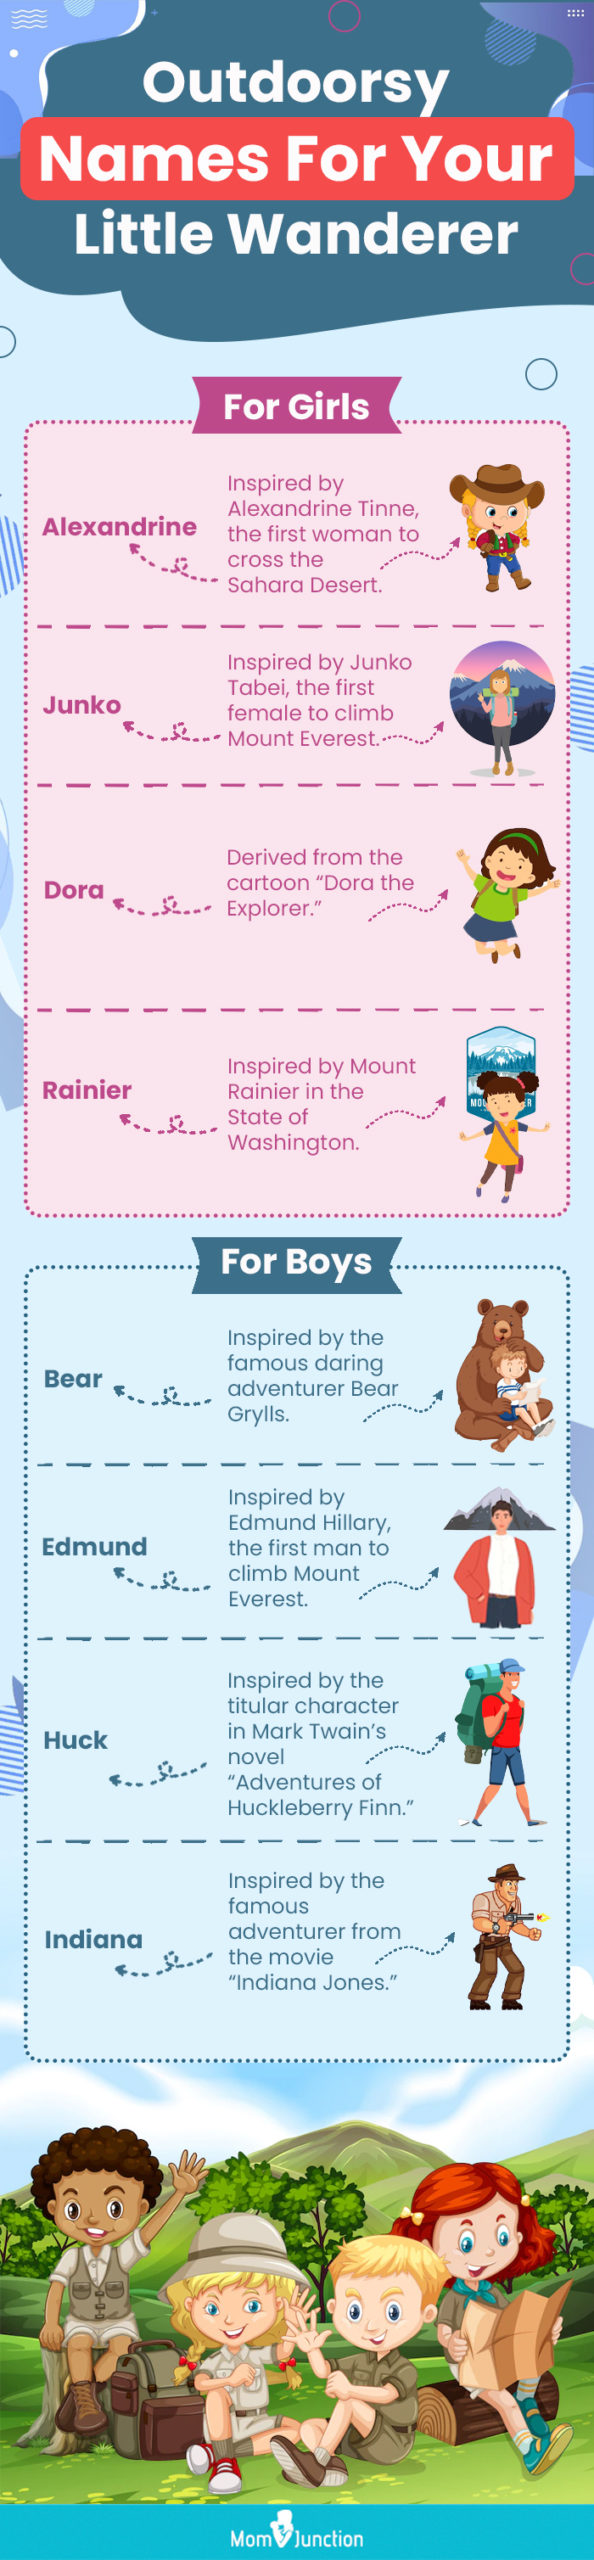 outdoorsy names for your little wanderer (infographic)